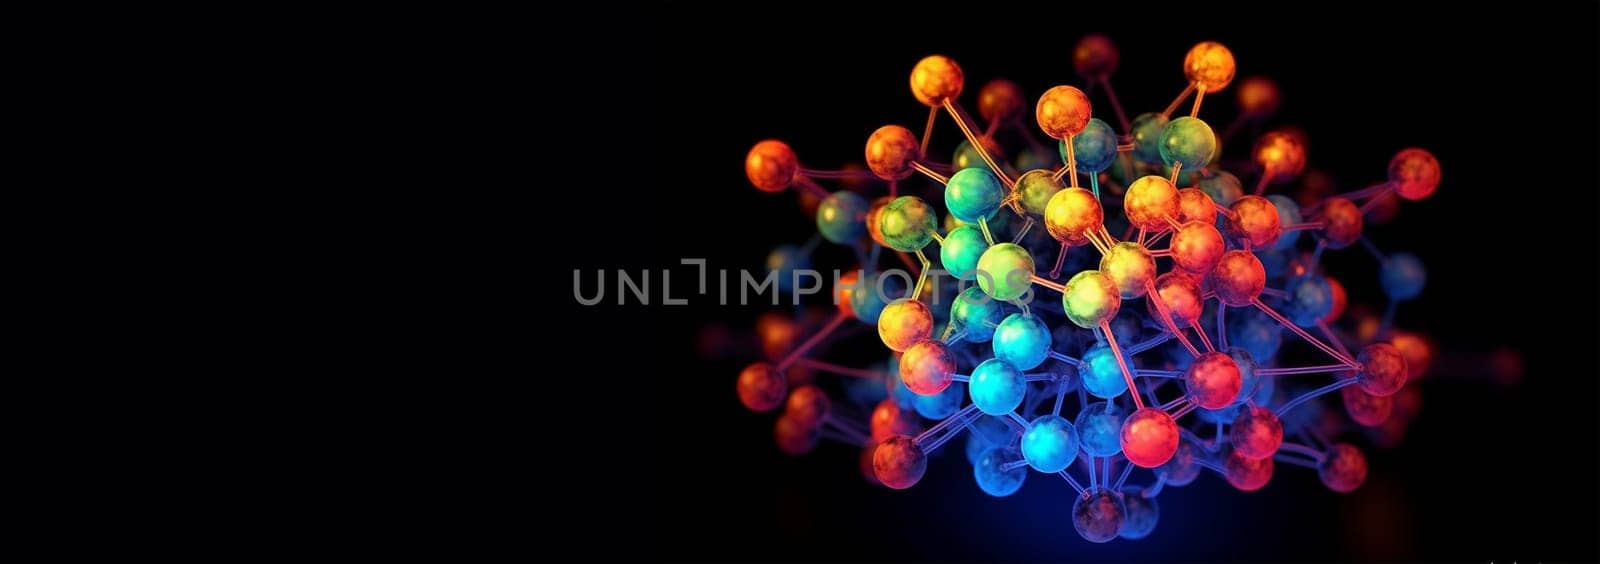 Neon light molecule black background. Alternative hydrogen energy futuristic concept with glowing low polygonal hydrogen molecules and place for text on dark black background. Modern abstract wire frame mesh design illustration. DNA by Annebel146